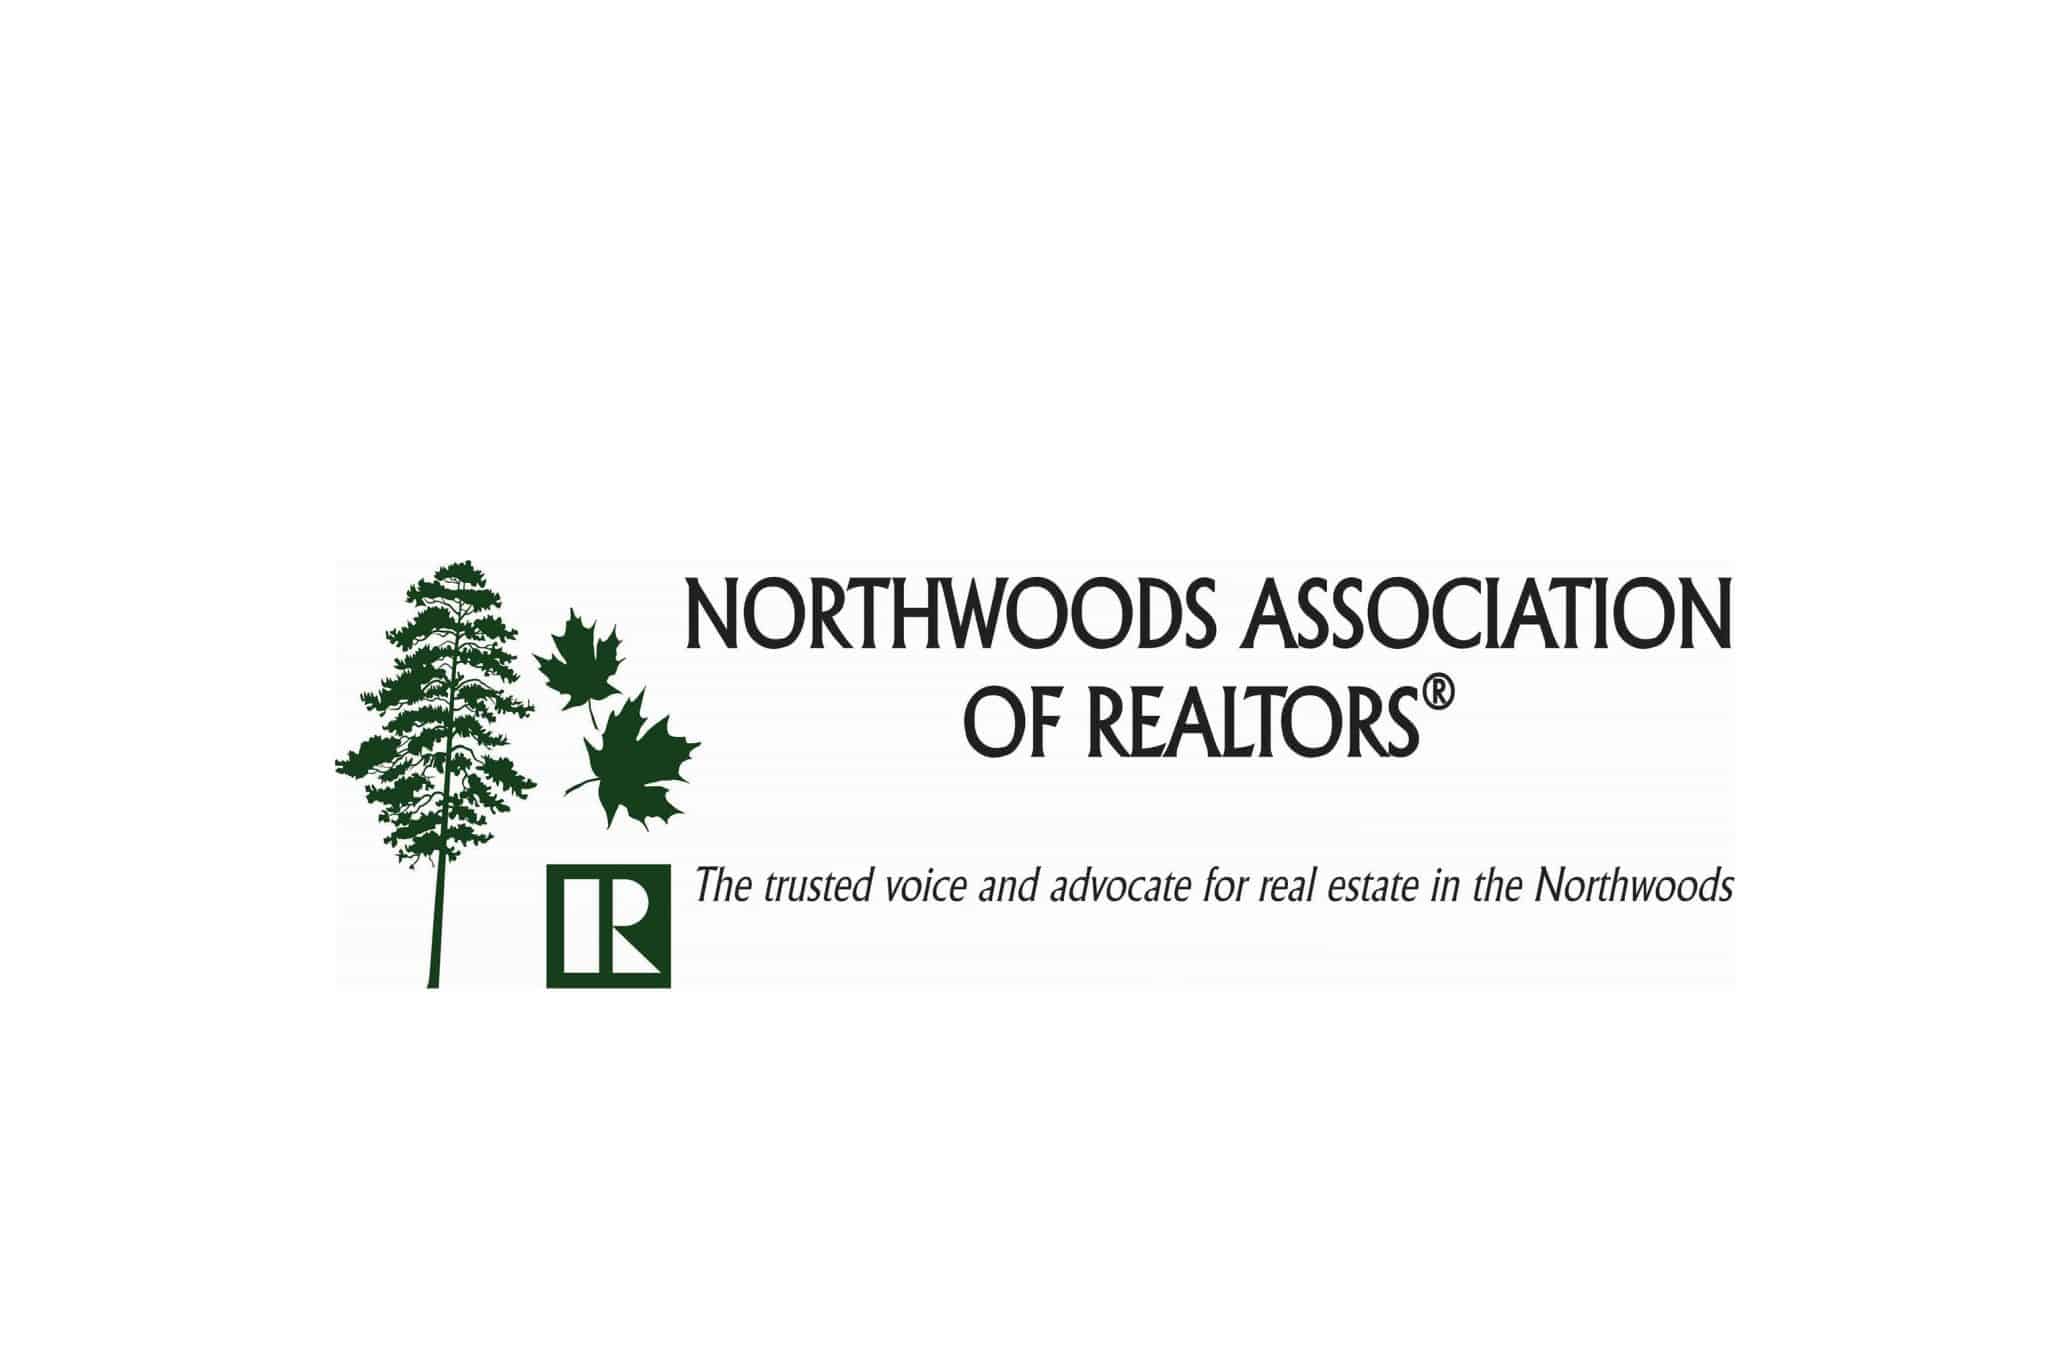 NWAR: 2020 ‘A banner year for Northwoods real estate’